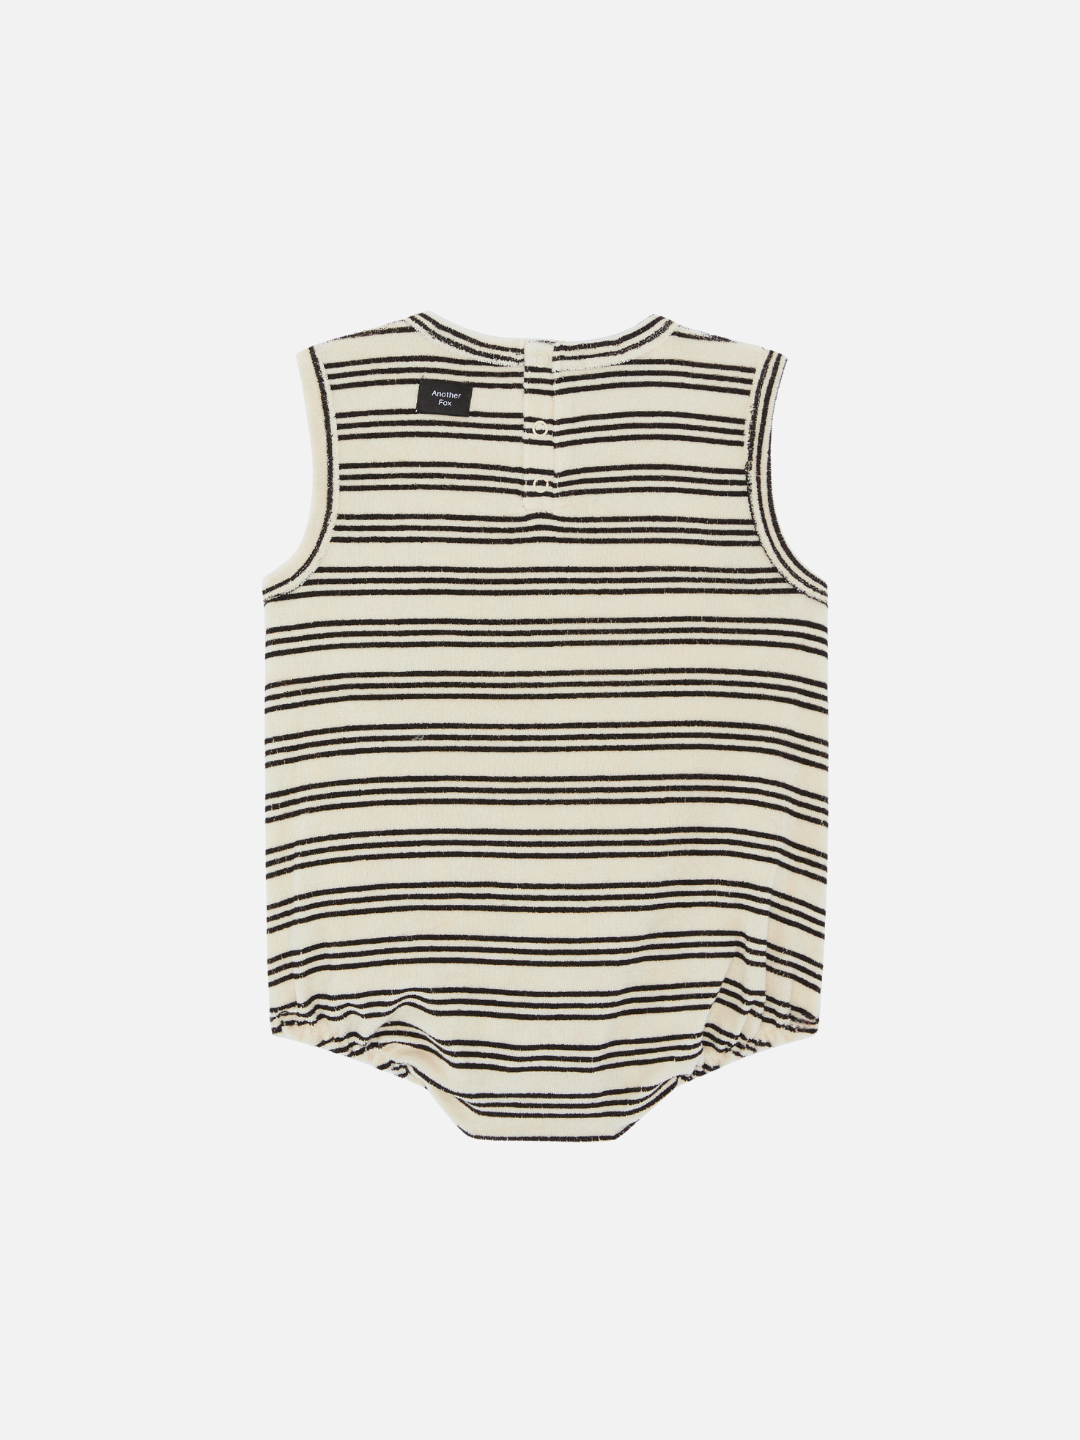 Back view of the baby terry bubble bodysuit in stripe